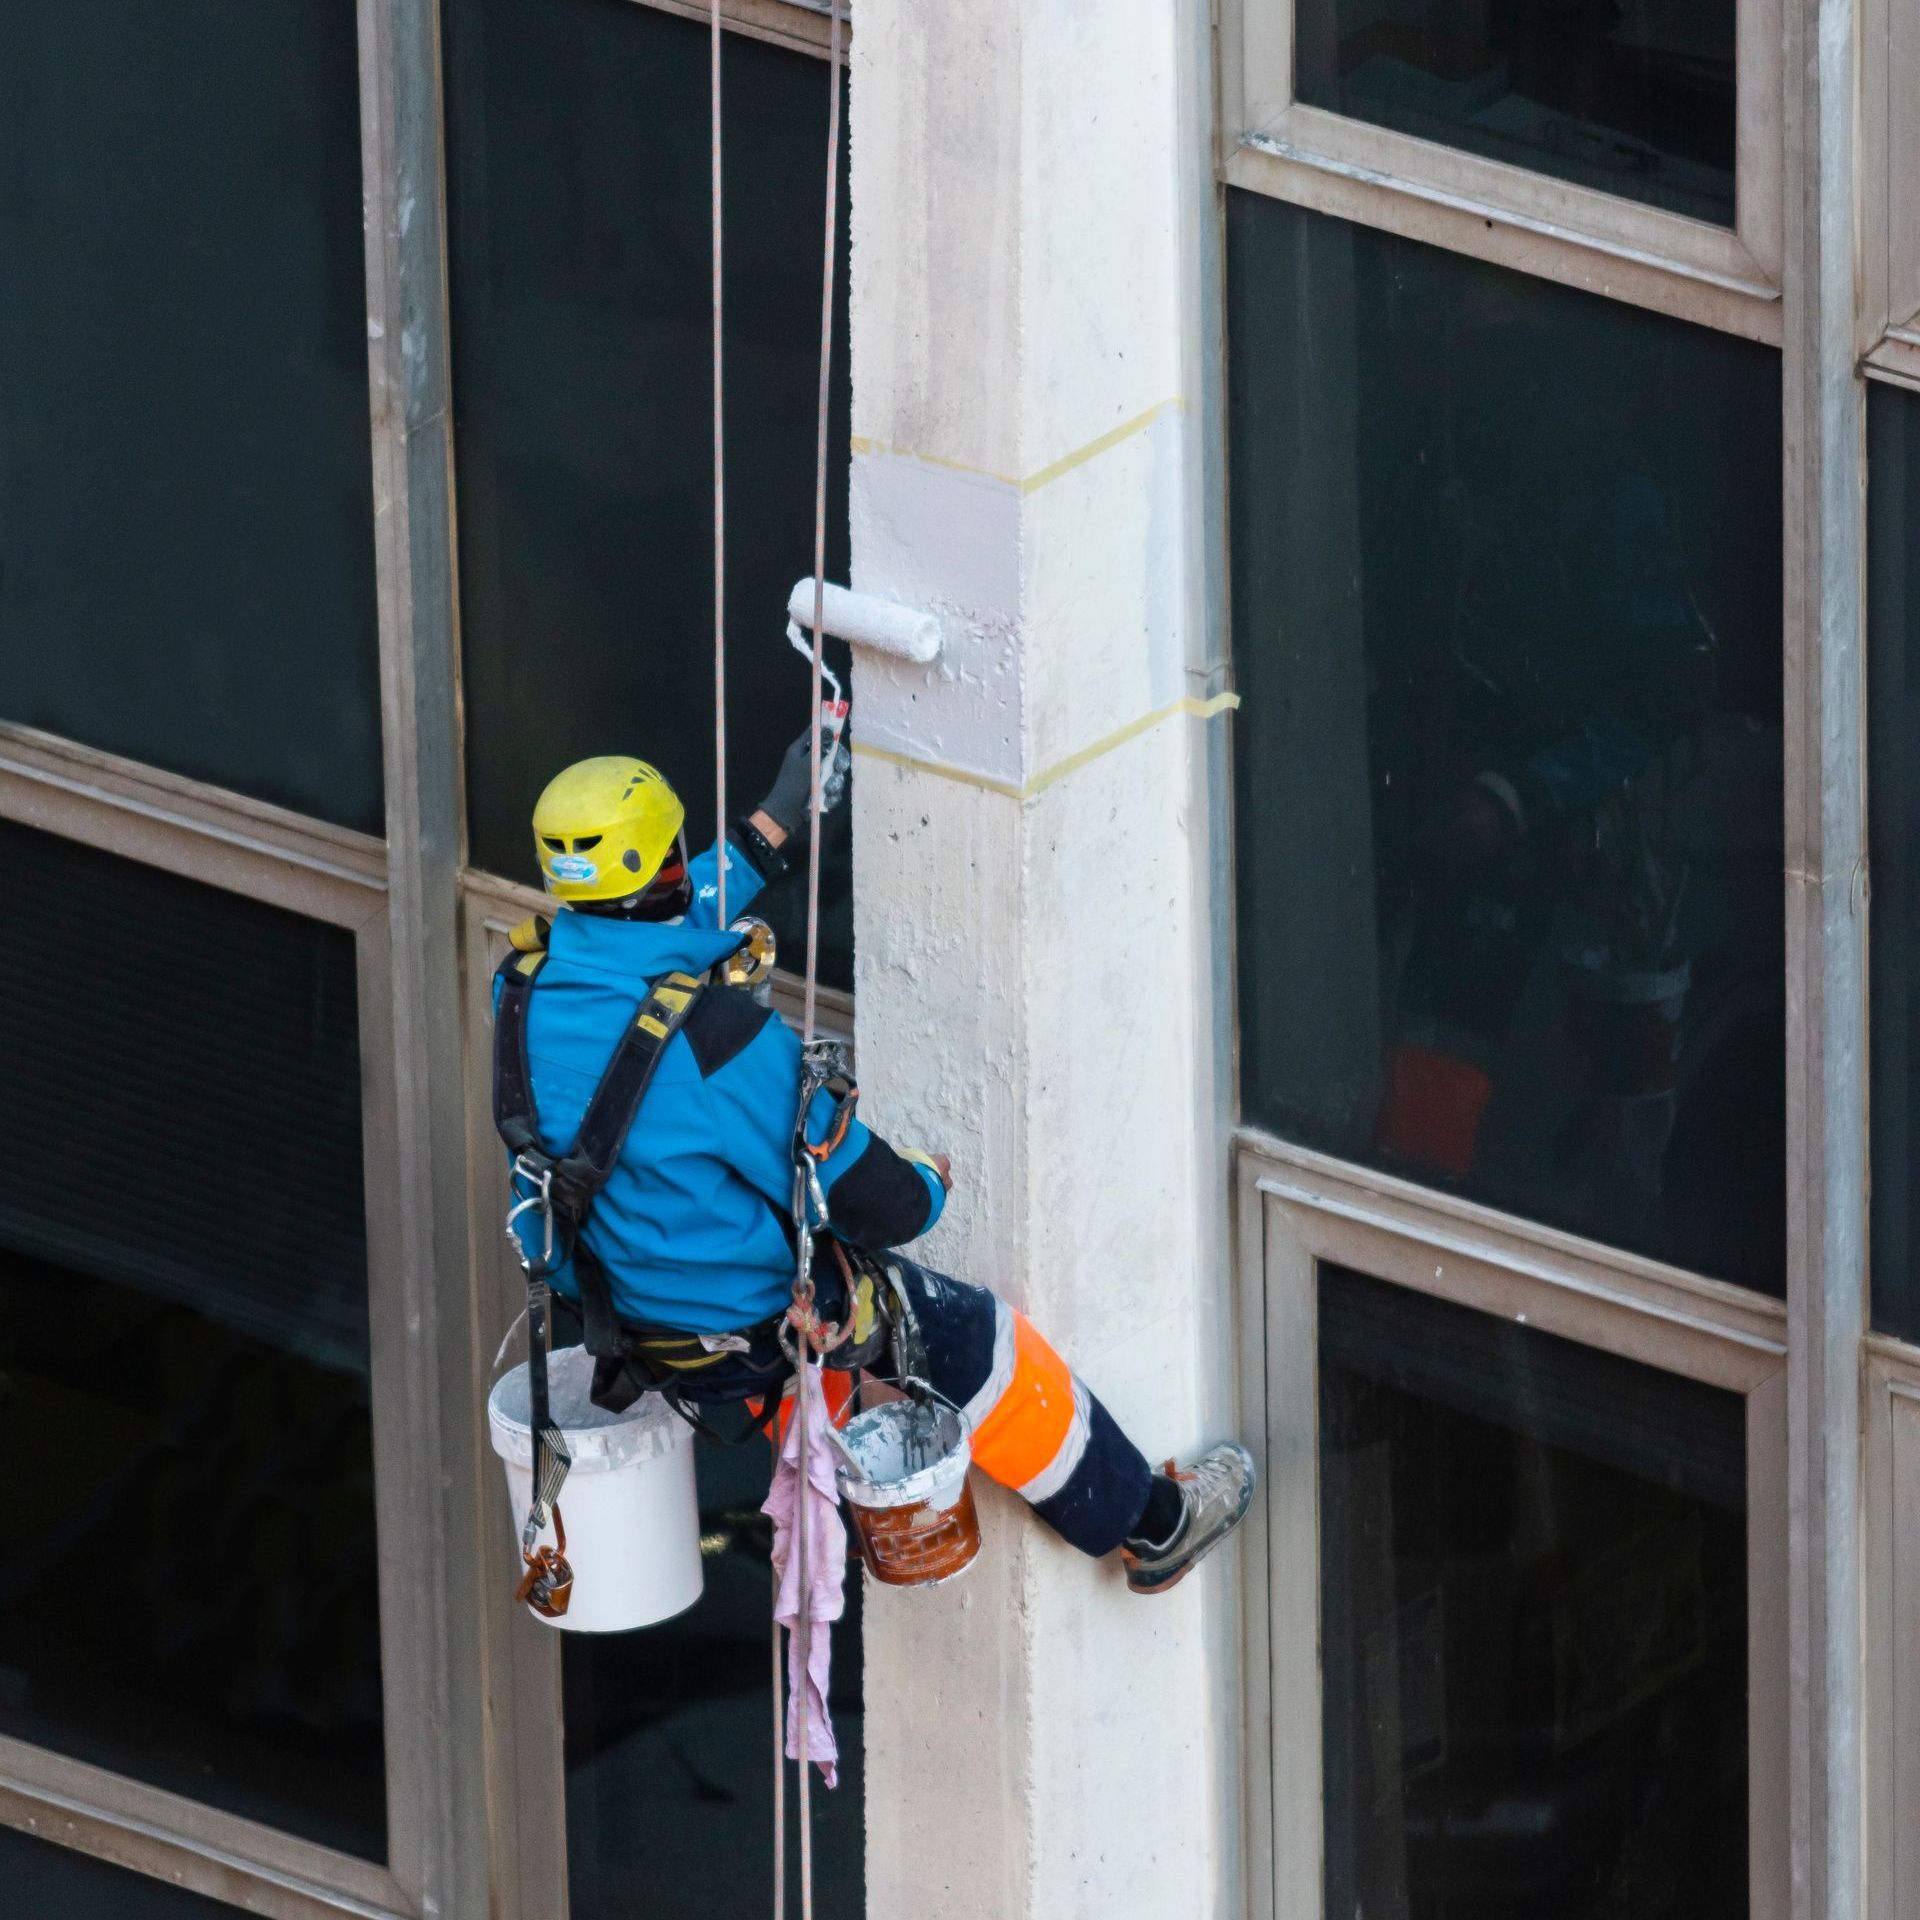 a man wearing a yellow helmet is painting a building